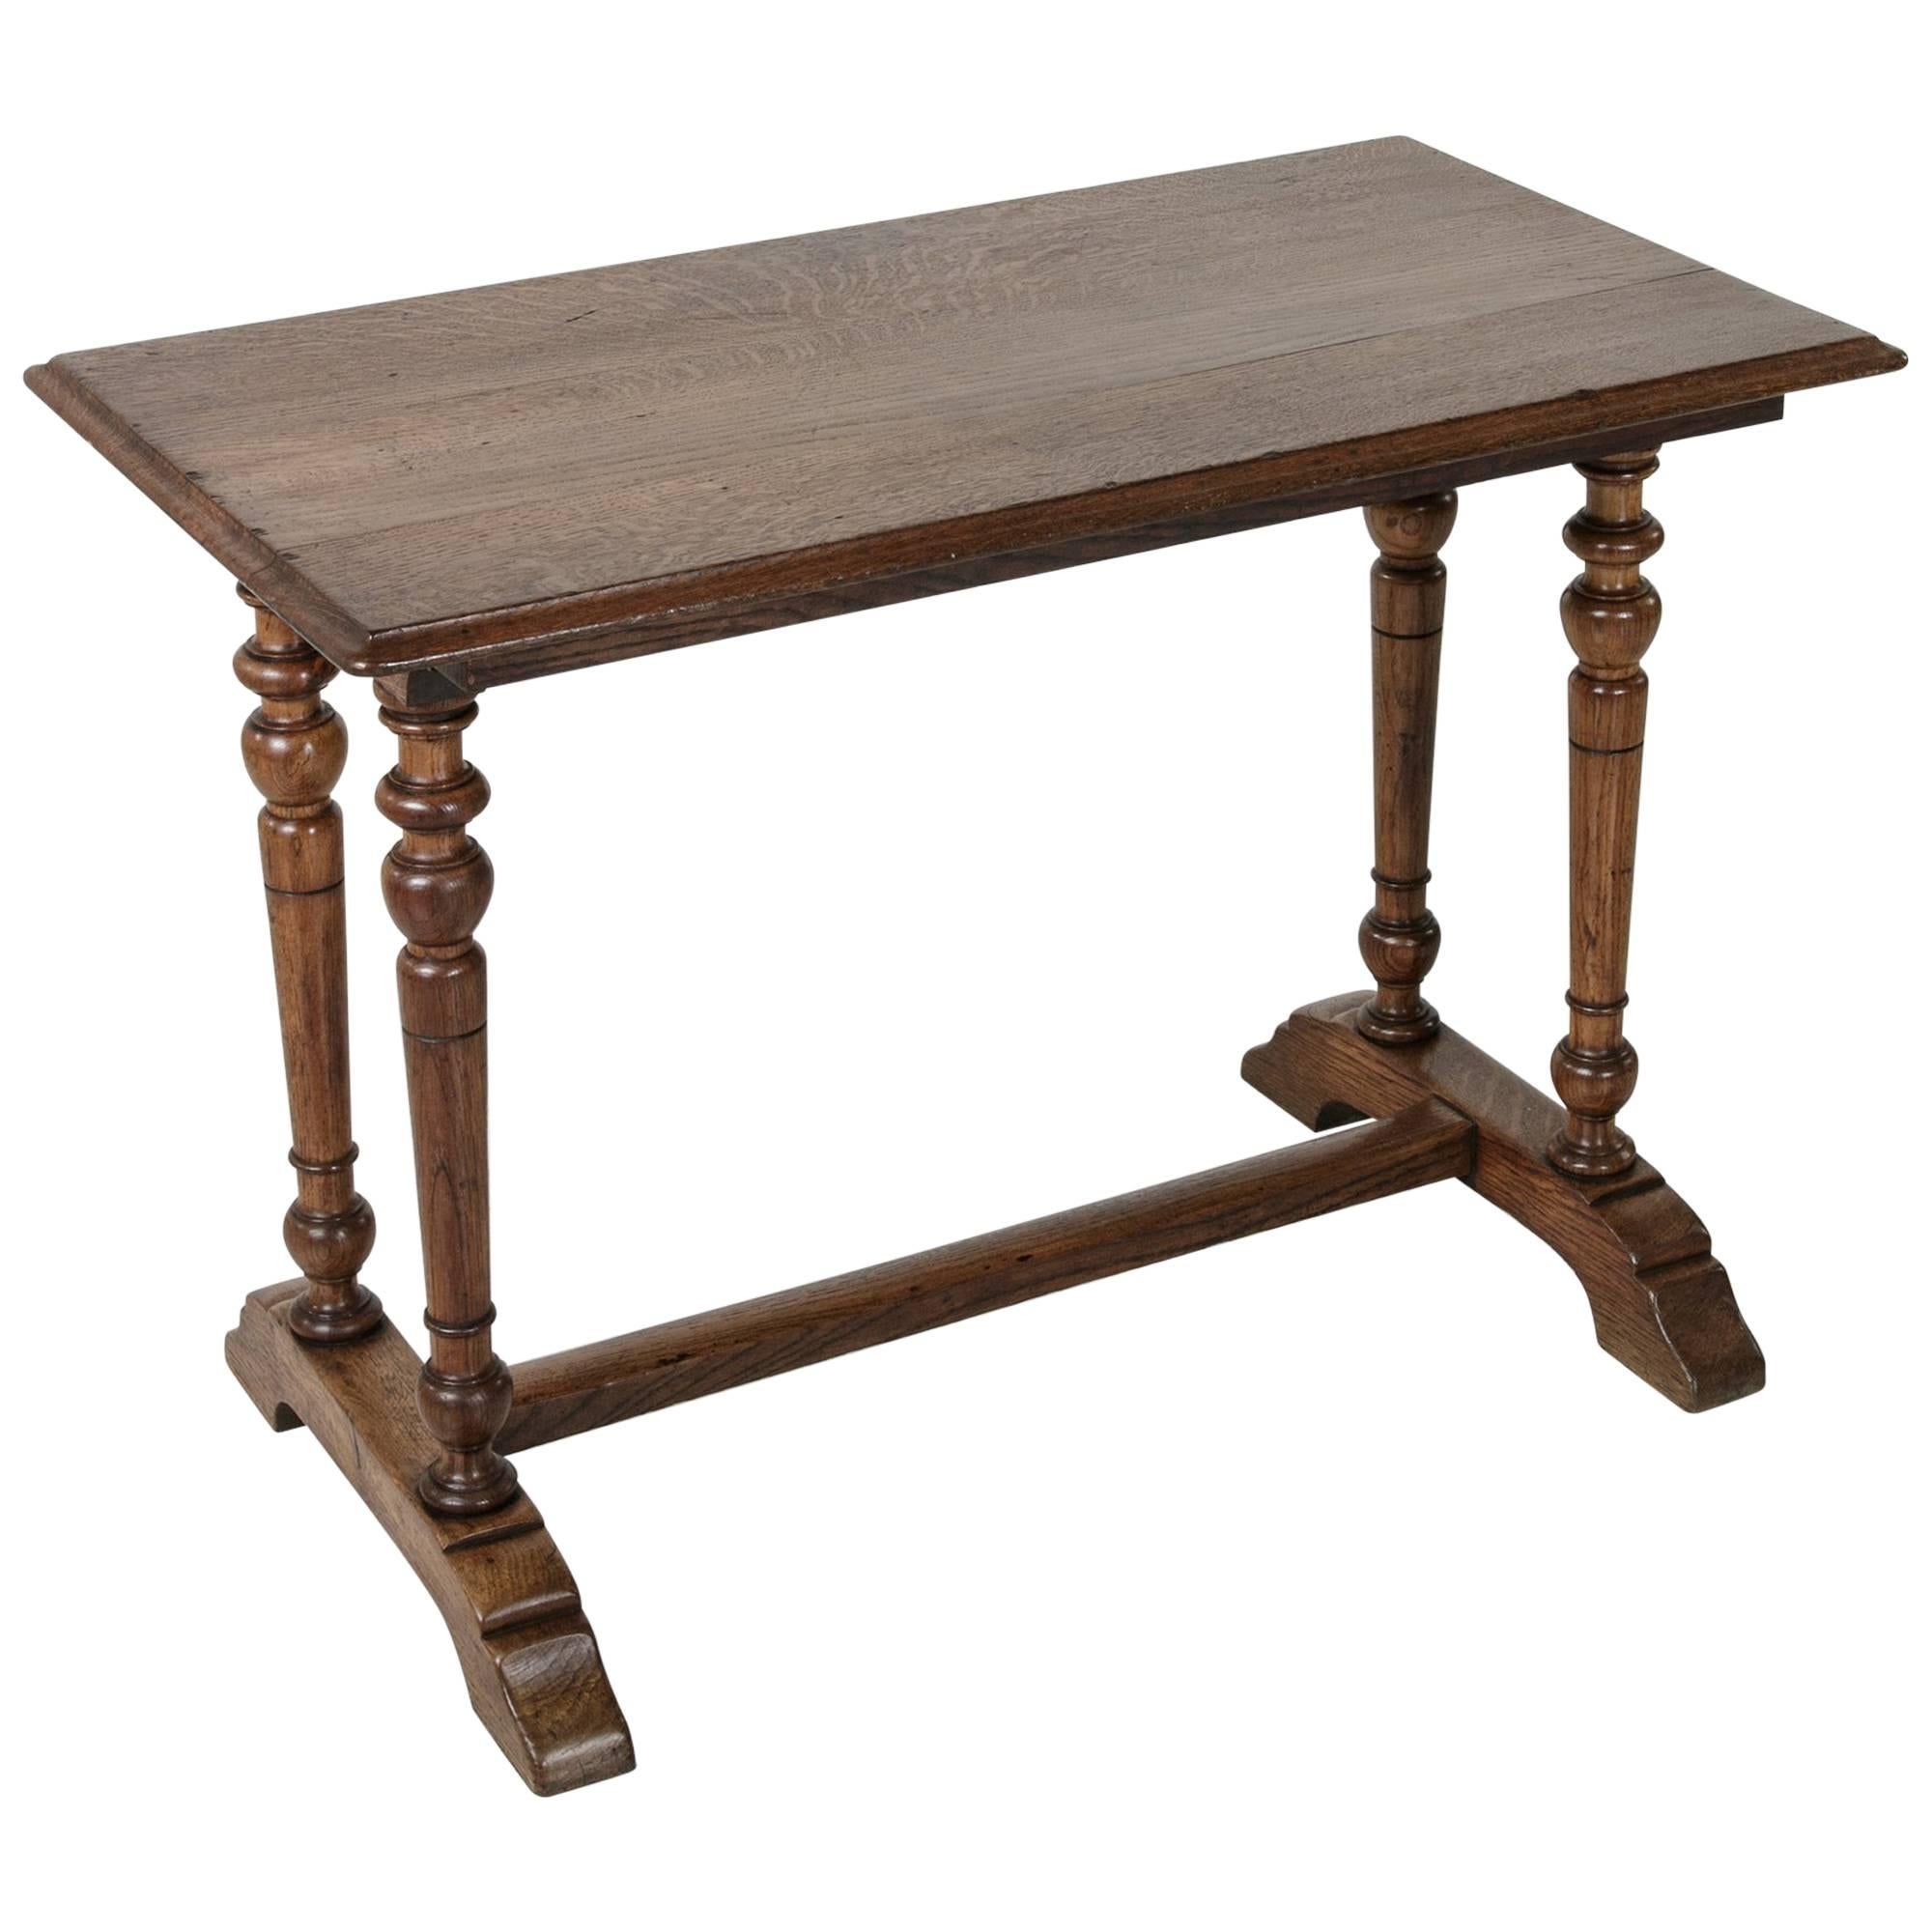 20th Century French Oak Bistro Pub Table Desk with Double Columns and Trestle